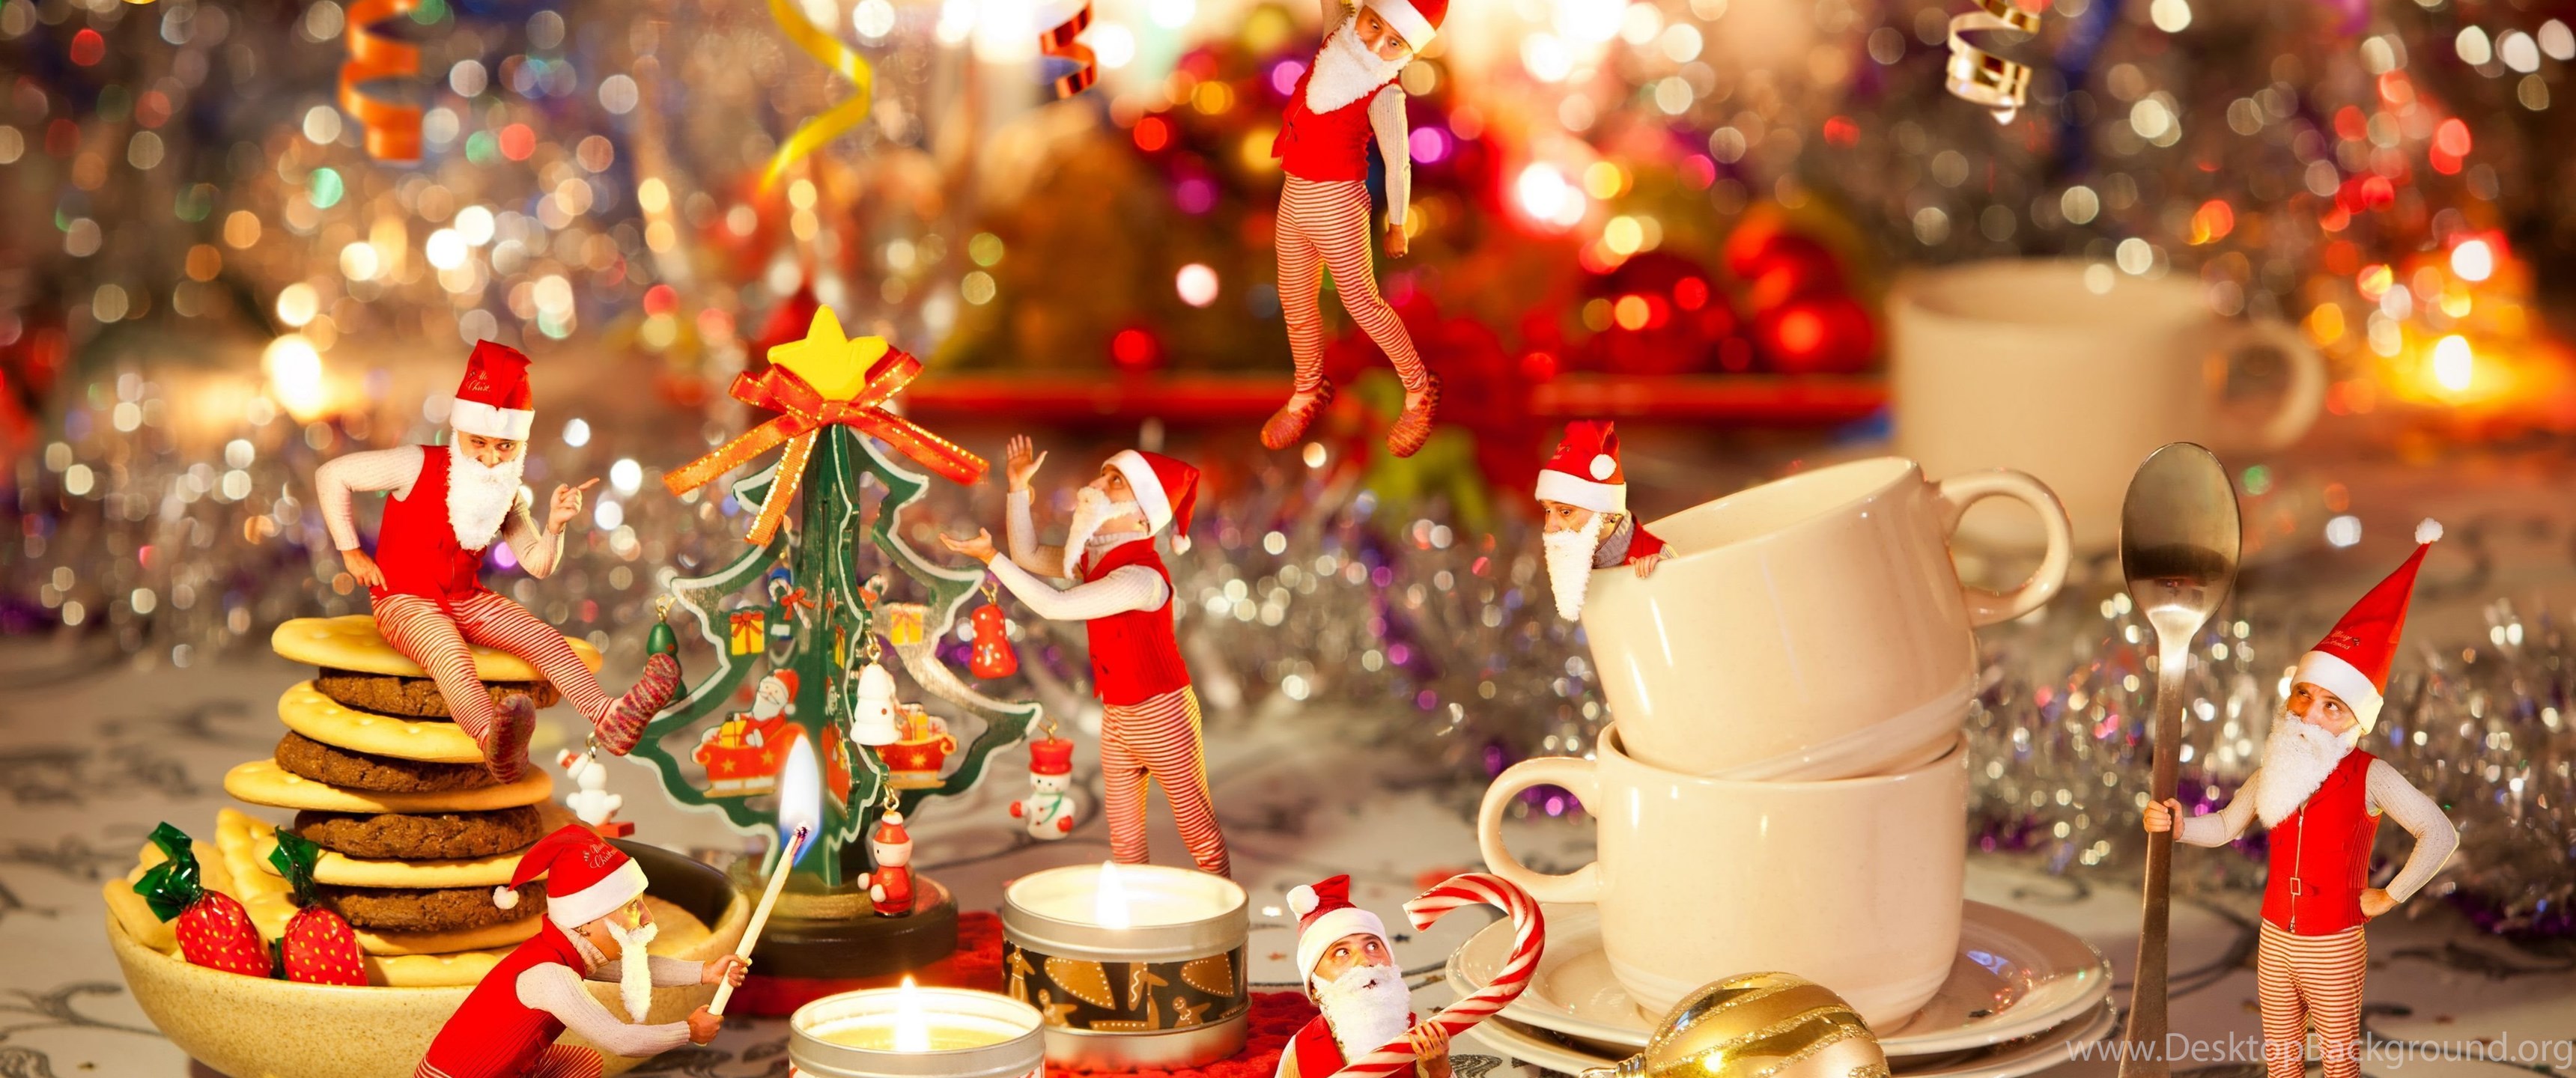 Widescreen - Red Gold Christmas Table Decorations , HD Wallpaper & Backgrounds